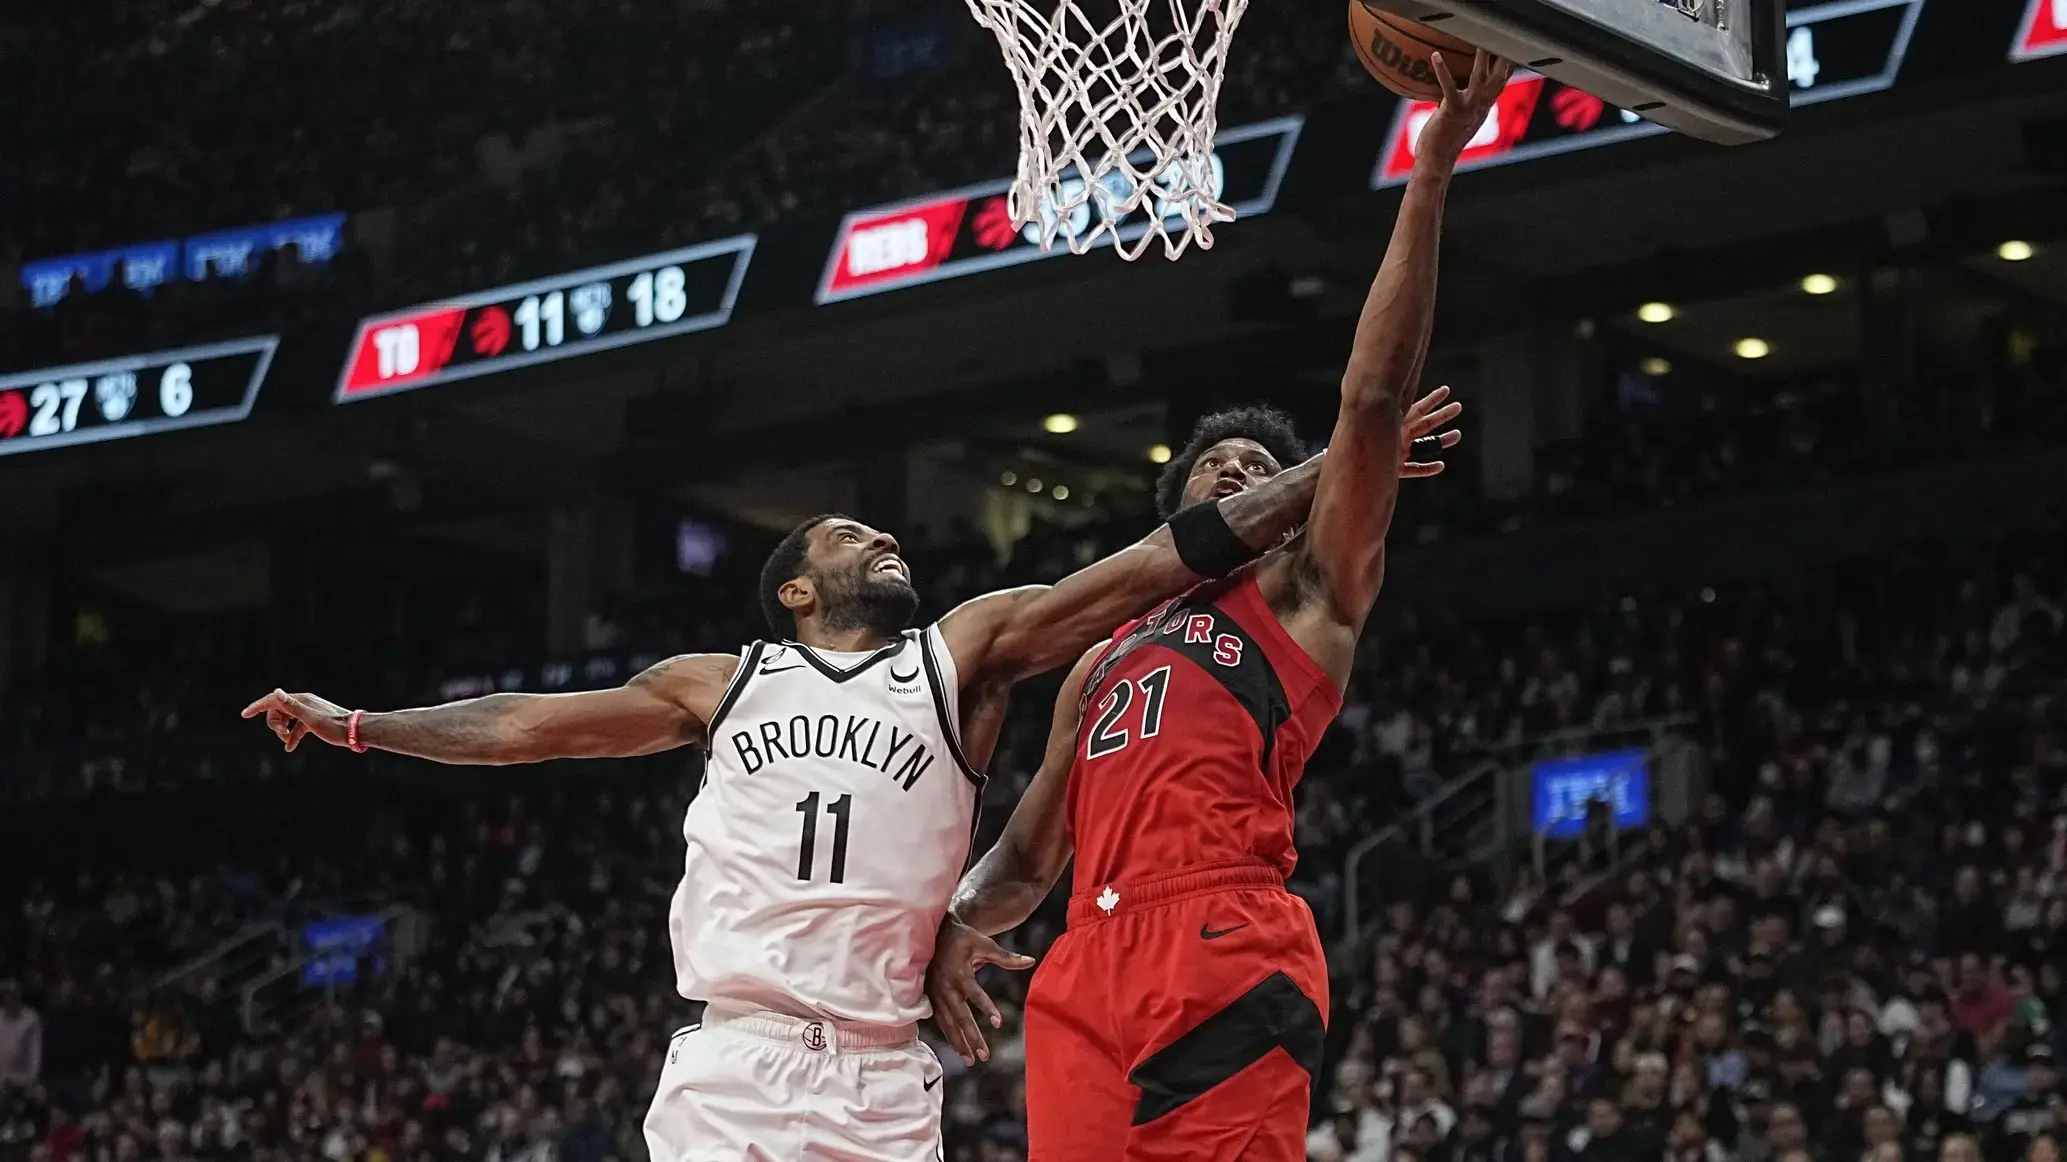 Nov 23, 2022; Toronto, Ontario, CAN; Brooklyn Nets guard Kyrie Irving (11) defends against Toronto Raptors forward Thaddeus Young (21) during the second half at Scotiabank Arena. / John E. Sokolowski-USA TODAY Sports